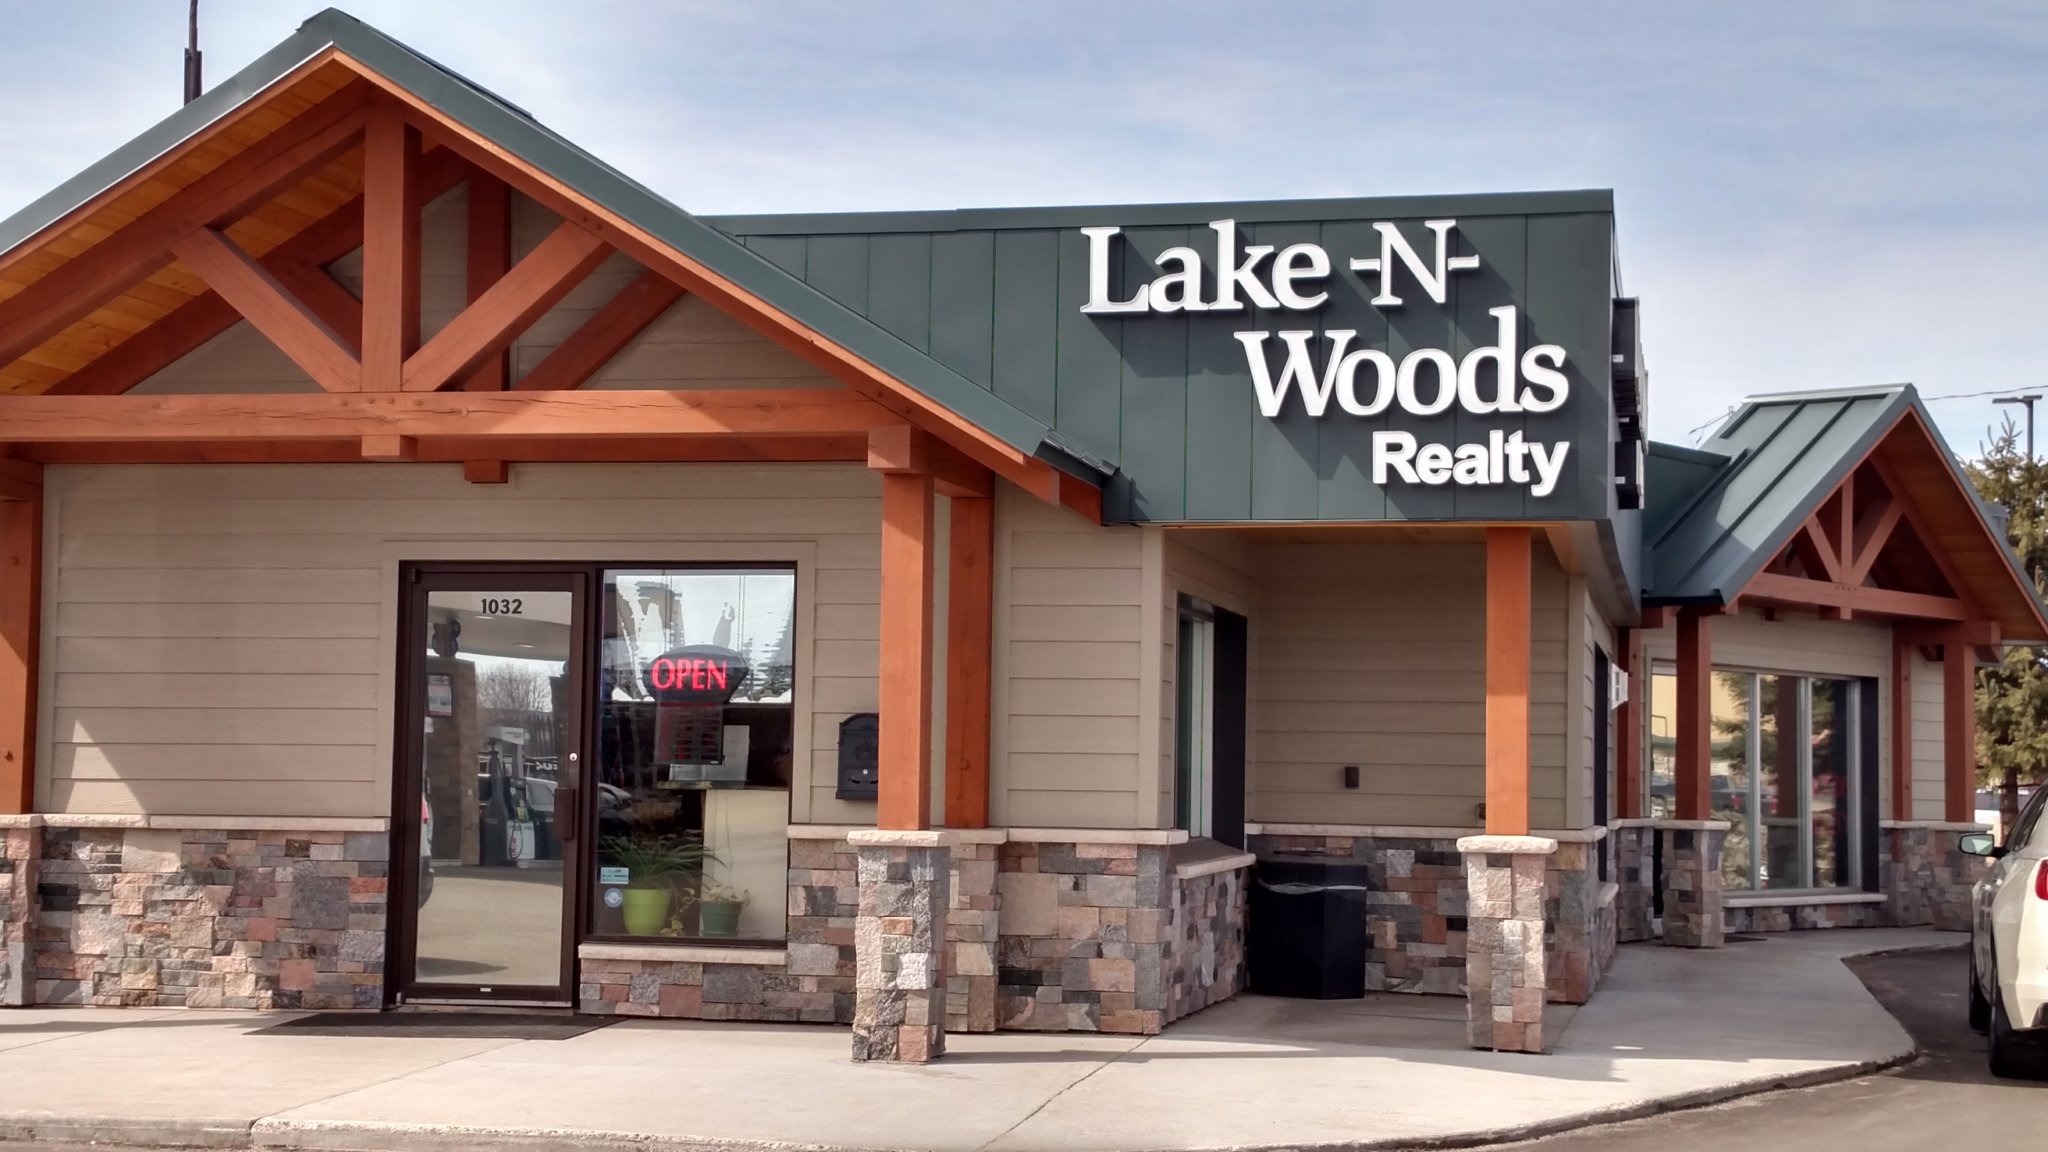 We are located right inside the Lake-N-Woods Realty office